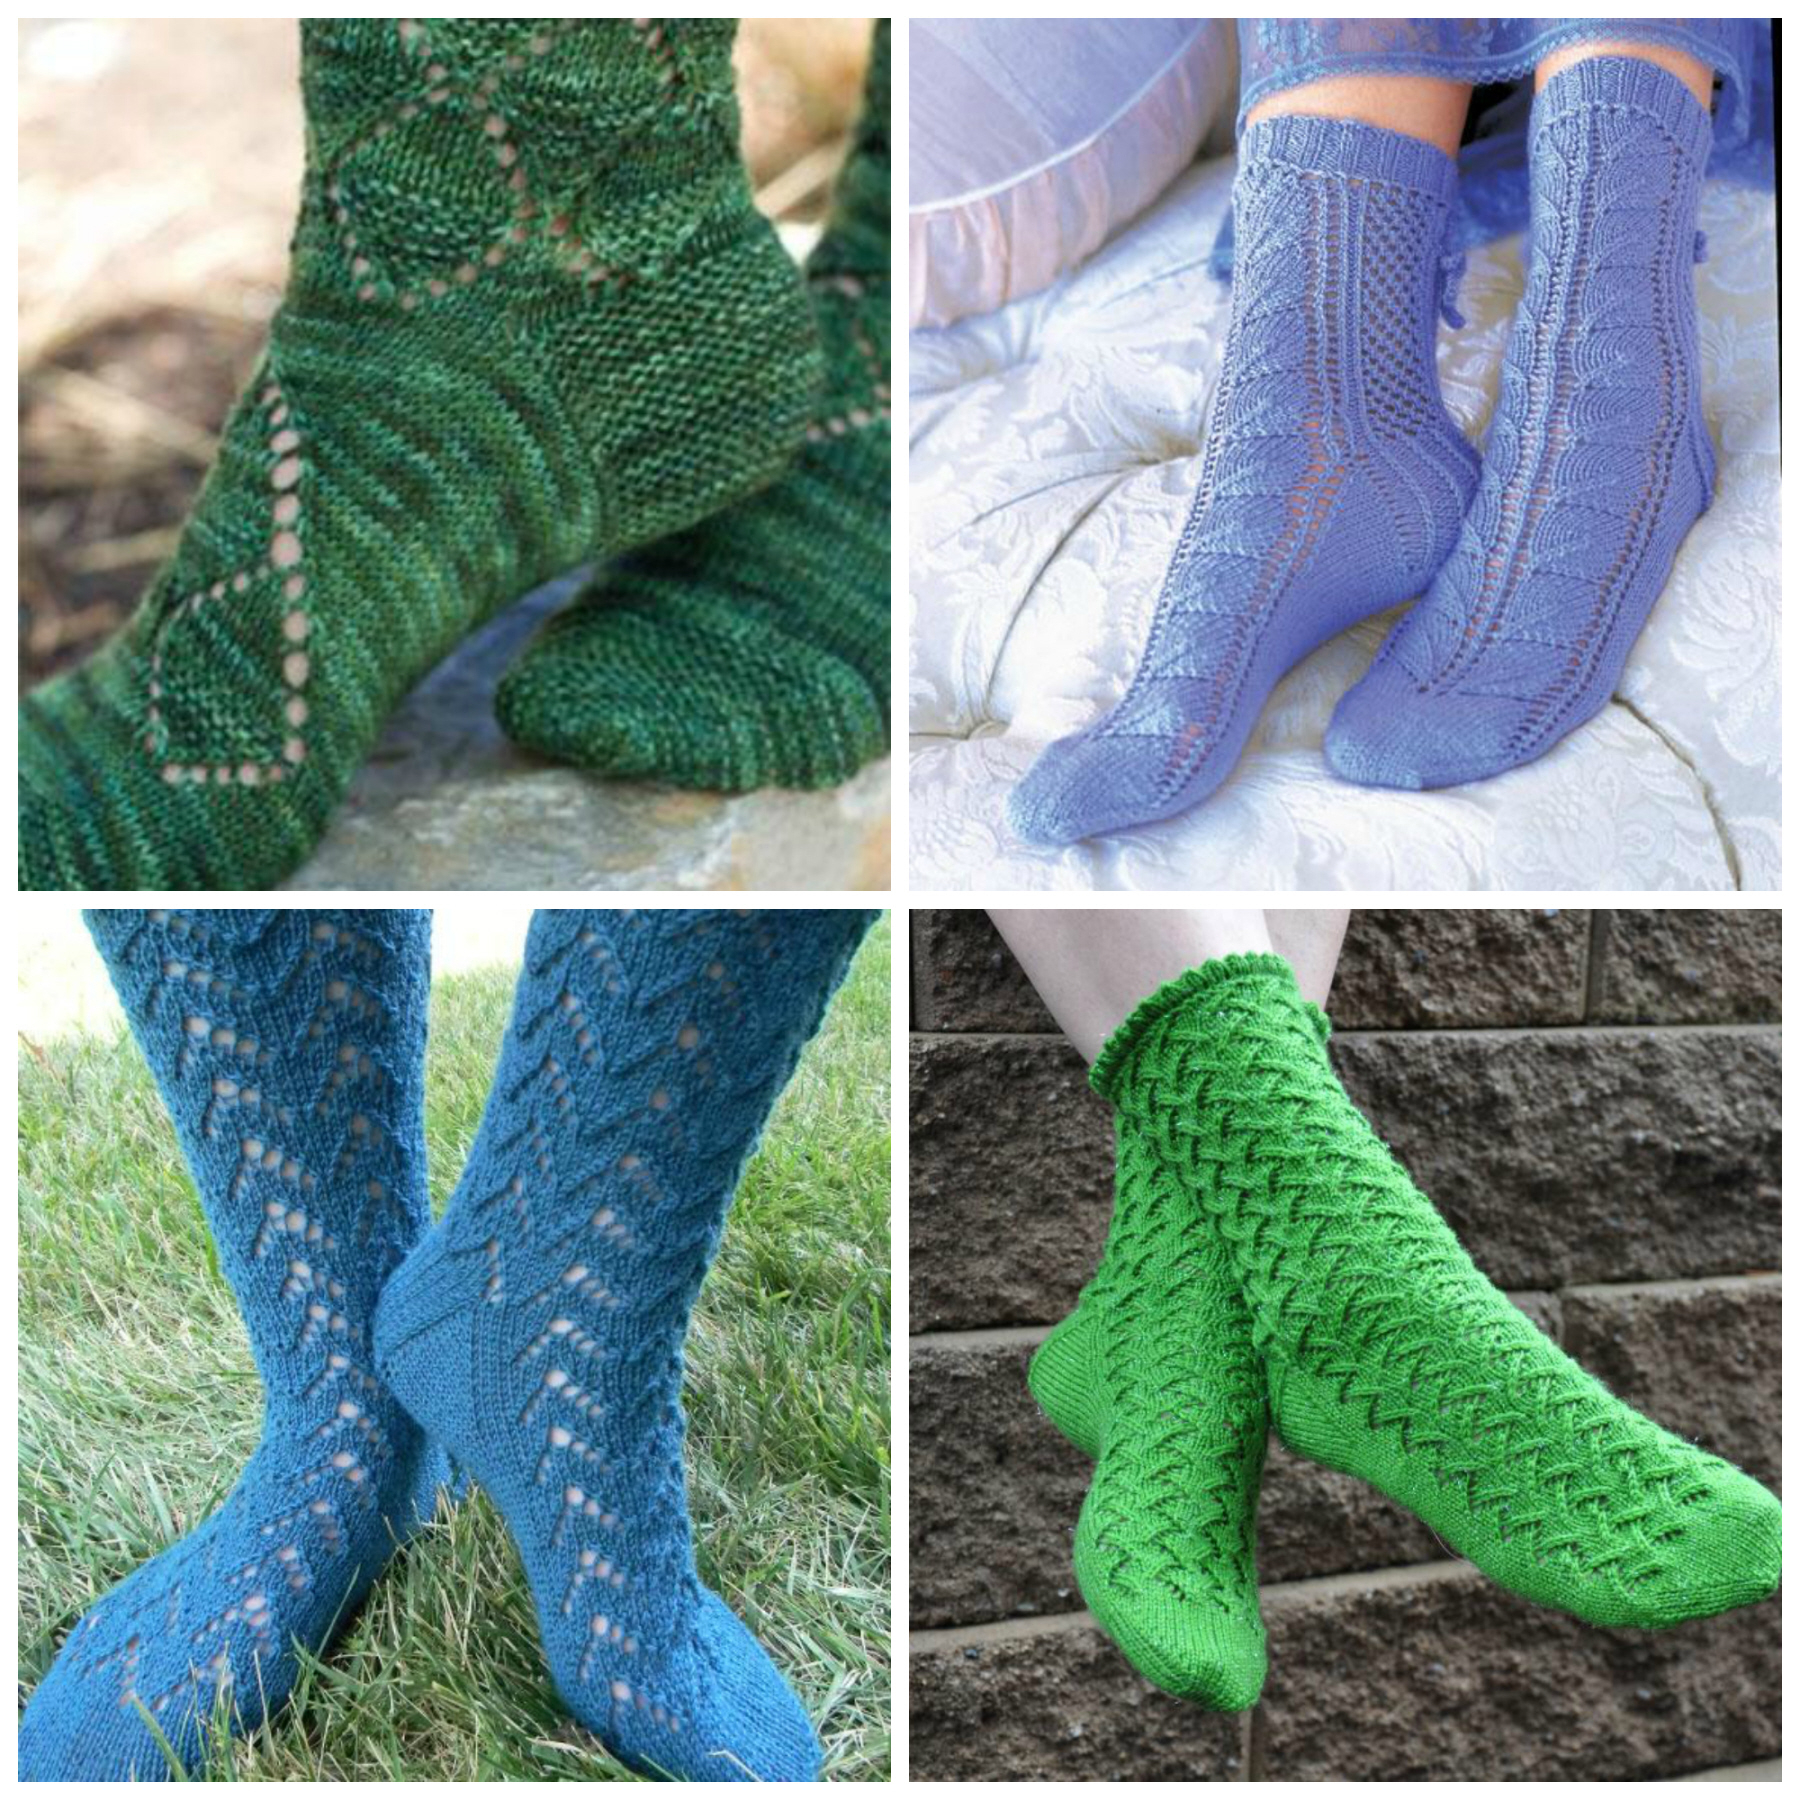 Knitted Lace Pattern Lace Sock Patterns For Summer Knitting